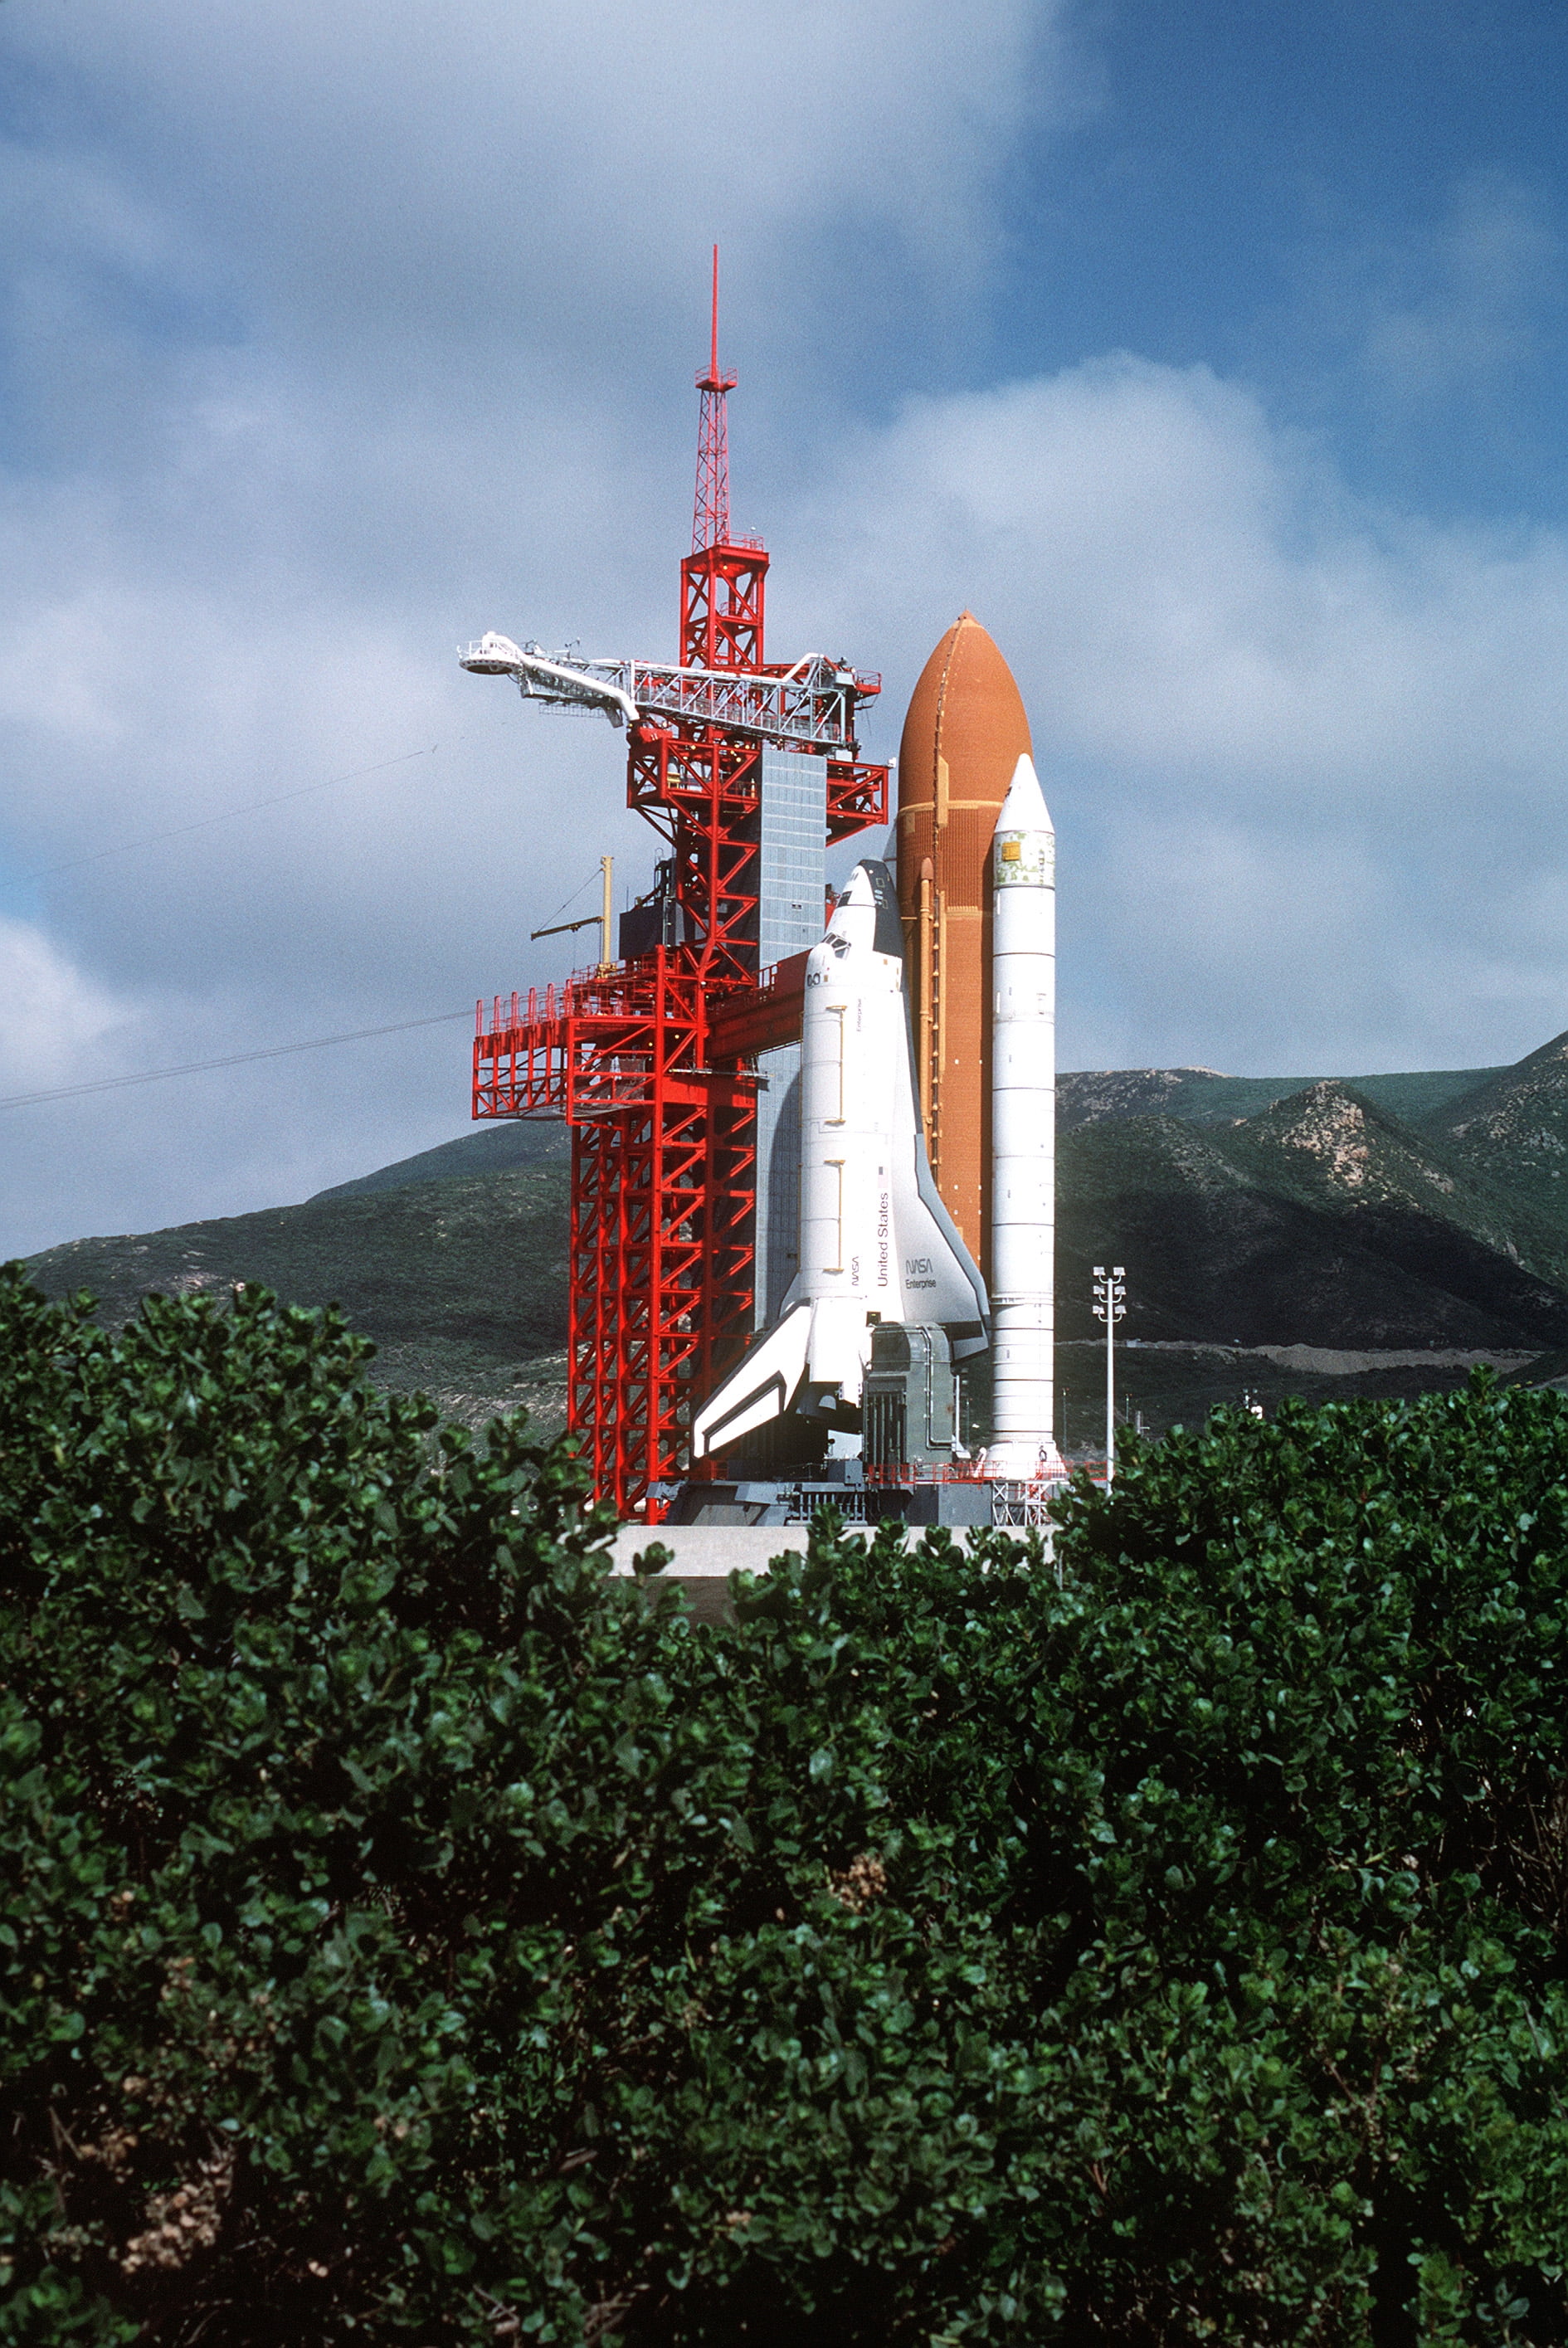 Space Shuttle Enterprise Is Seen On The Pad At Vandenberg Air Force